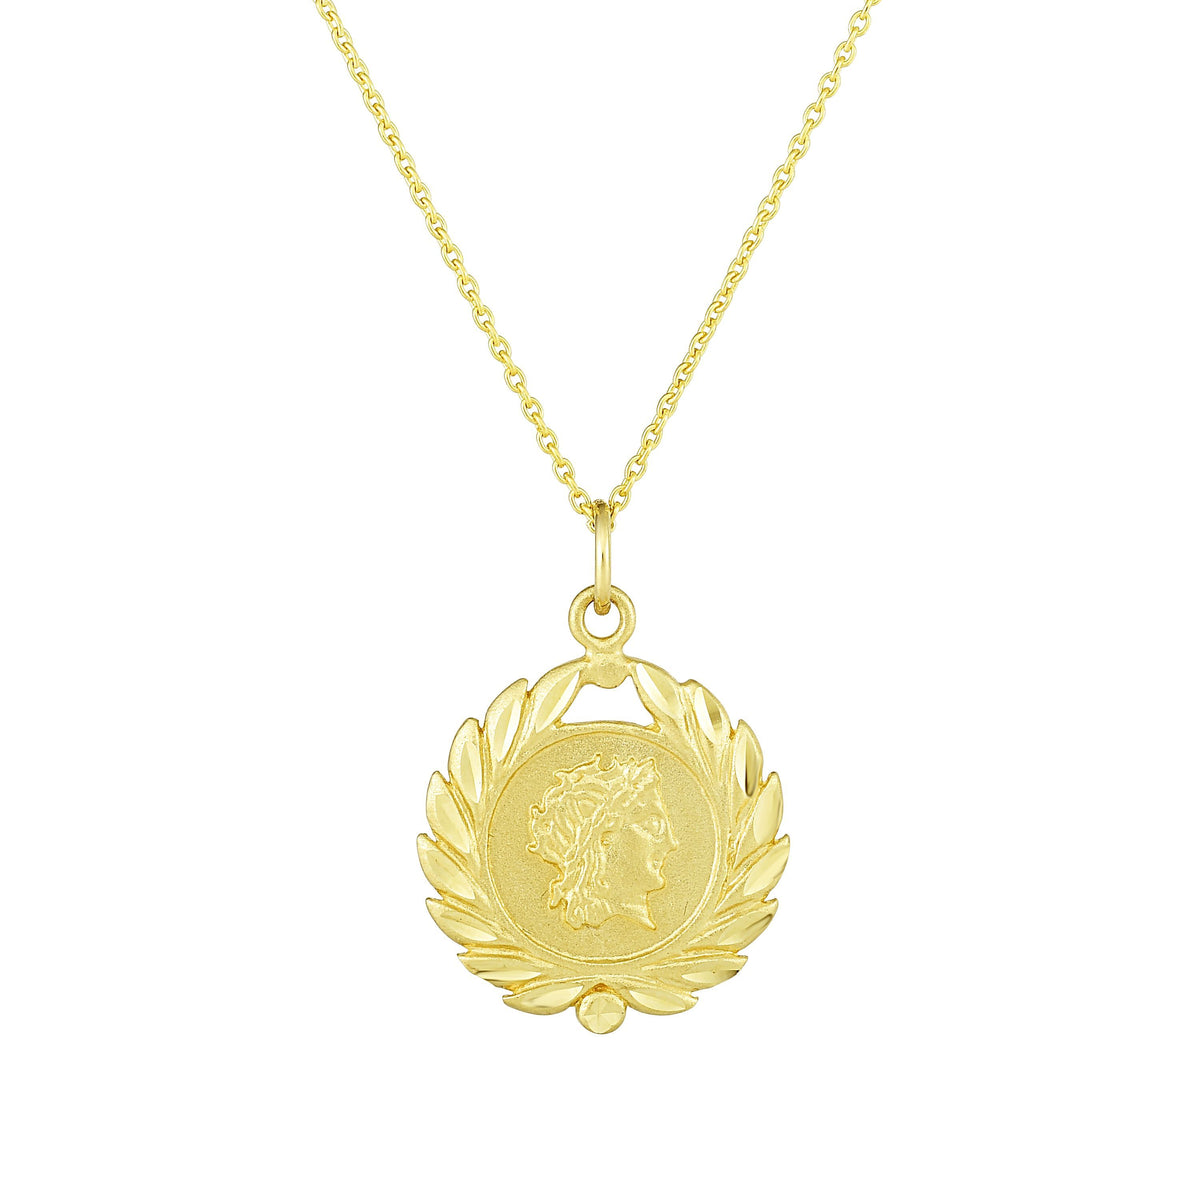 14k Yellow Gold Roman Coin Pendant Necklace, 18" fine designer jewelry for men and women